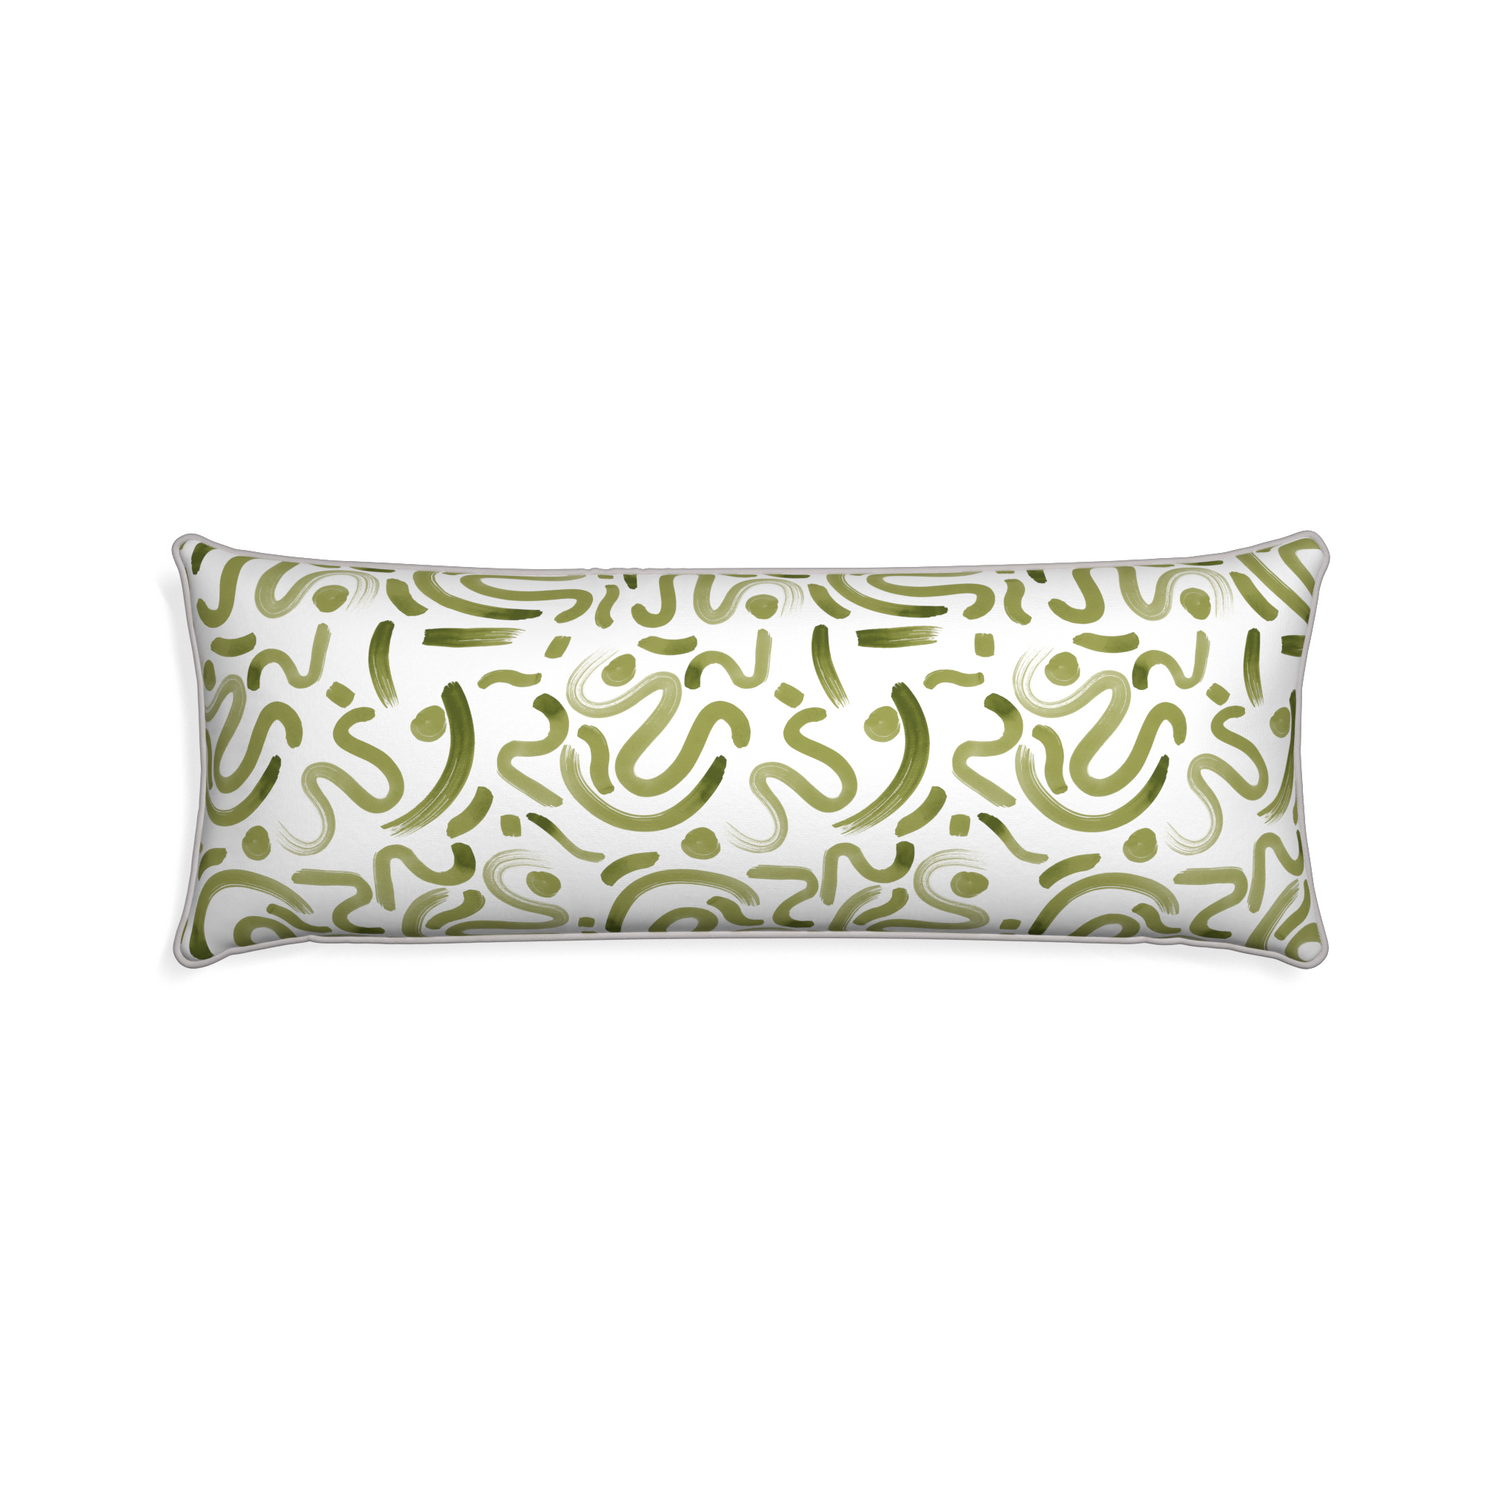 Xl-lumbar hockney moss custom moss greenpillow with pebble piping on white background